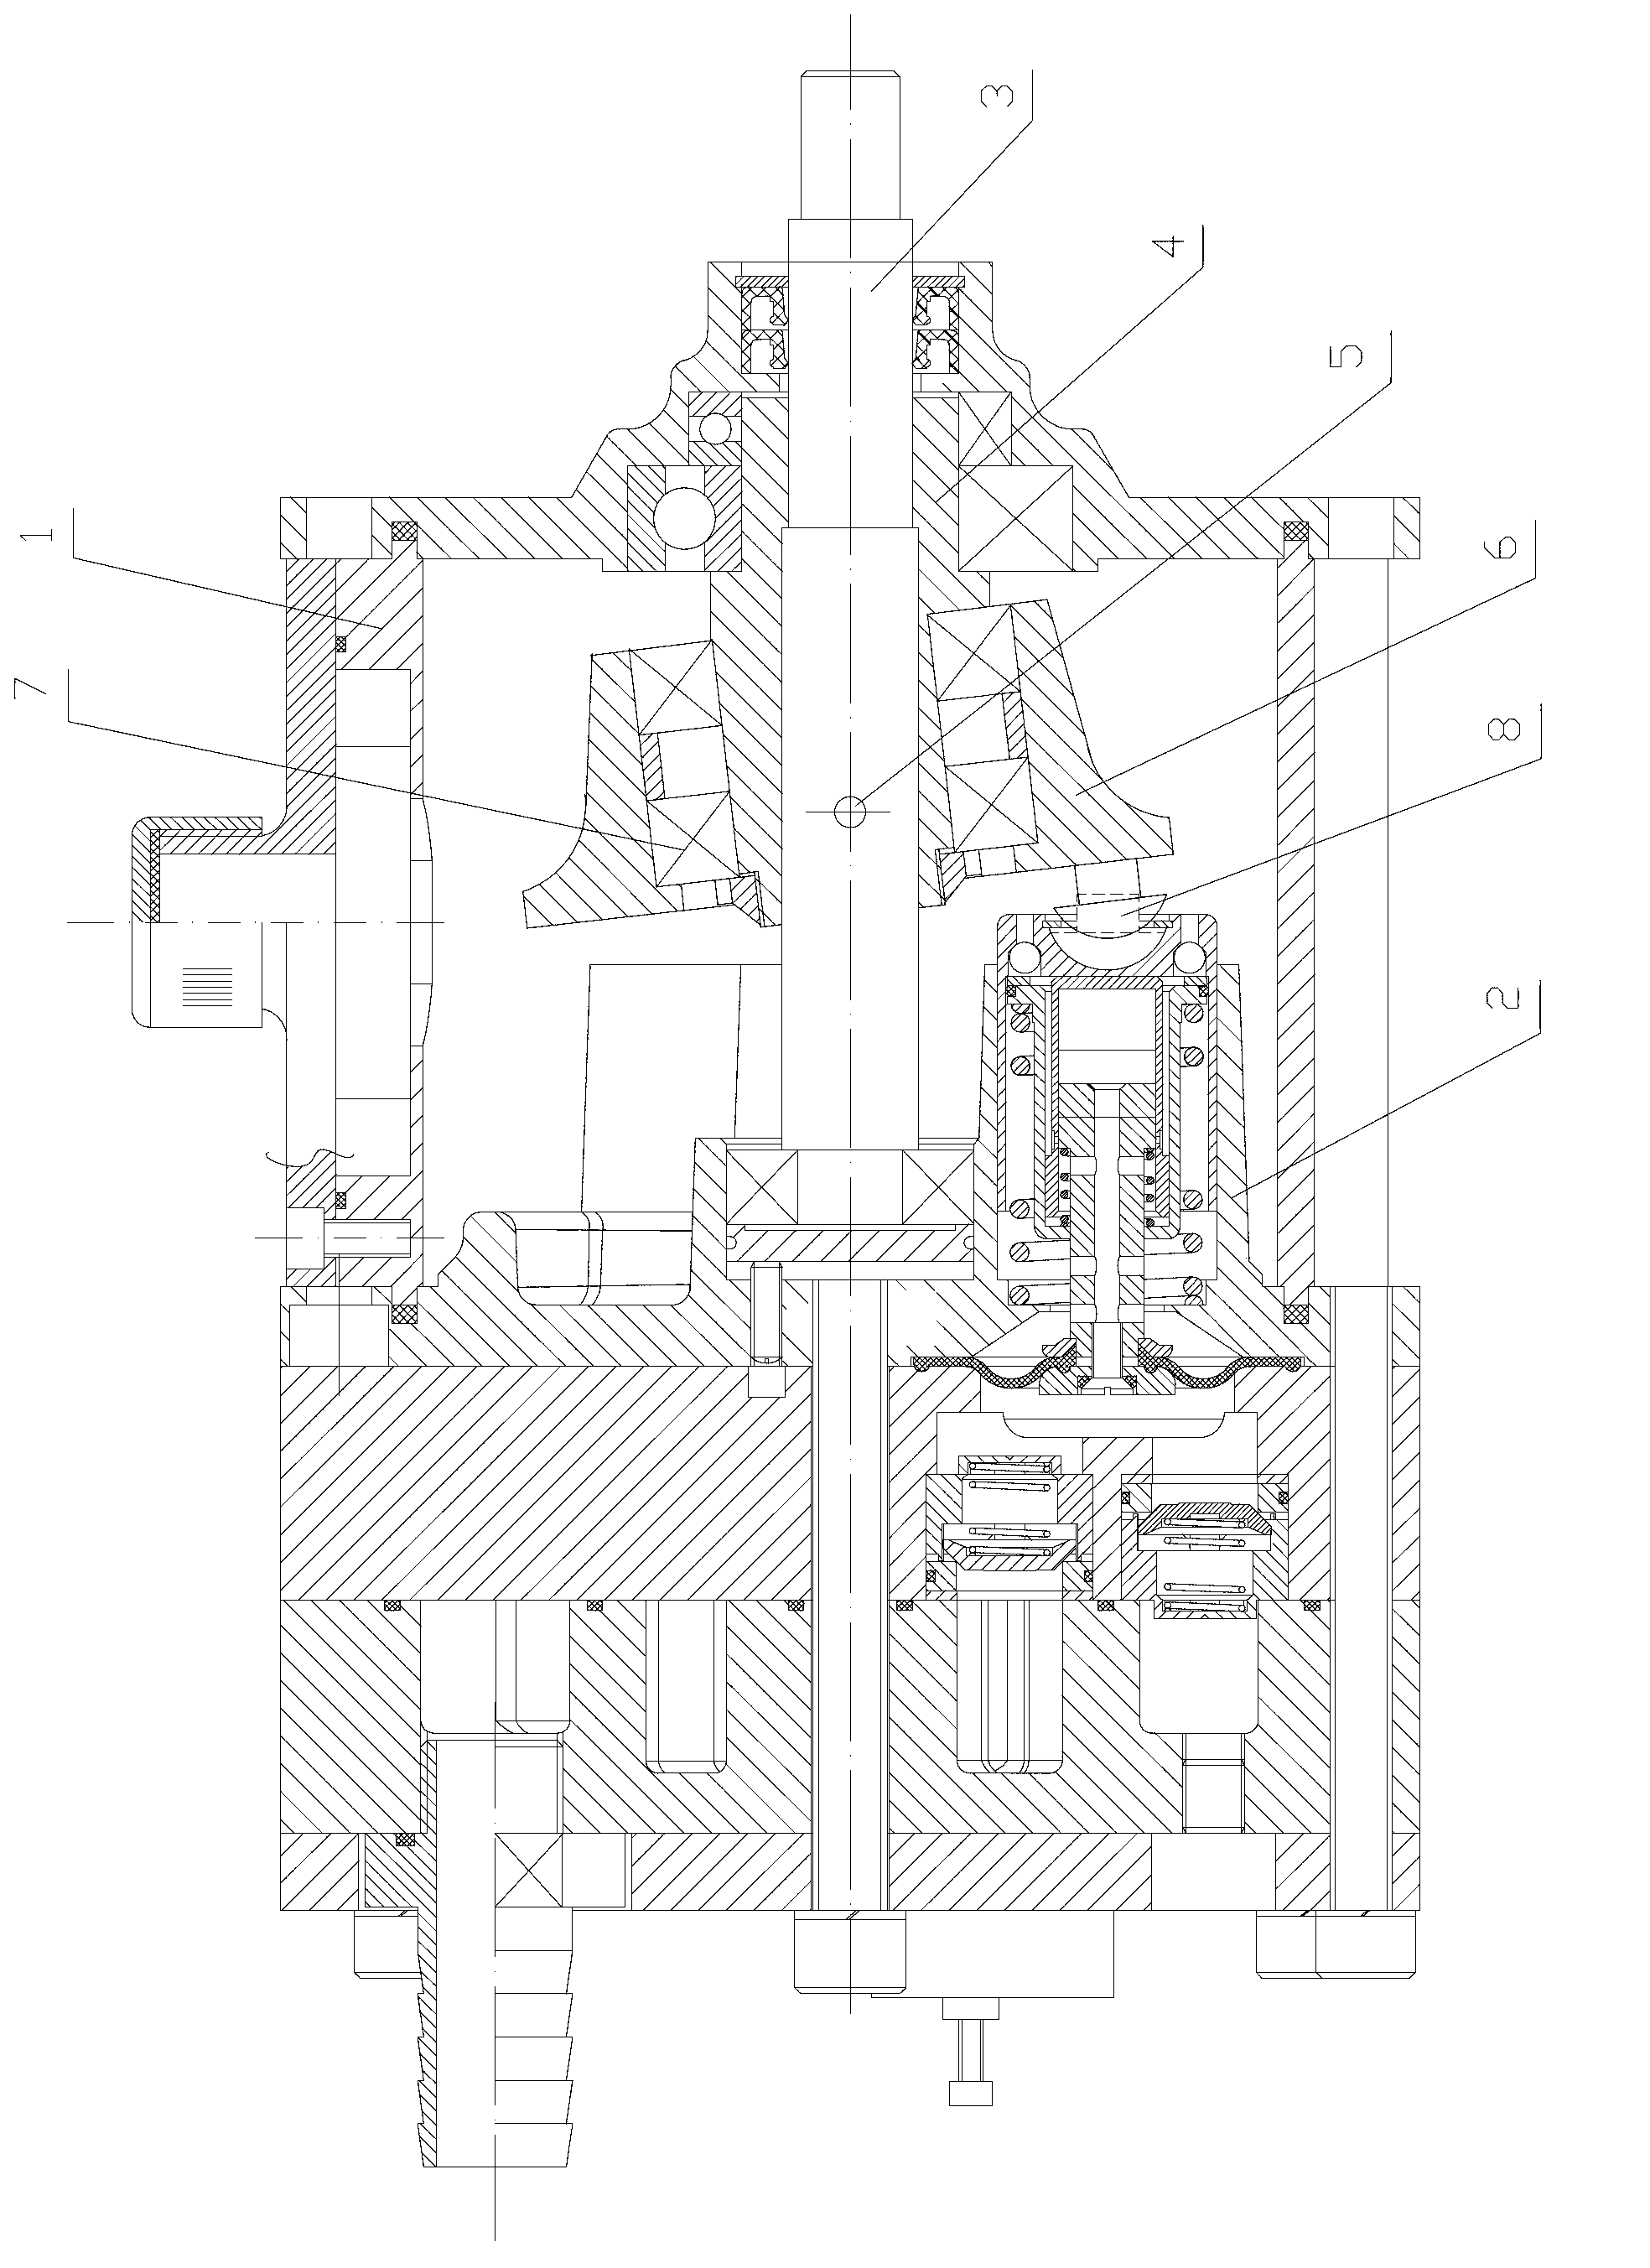 Three-cavity diaphragm pump comprising main shaft provided with limiting structure